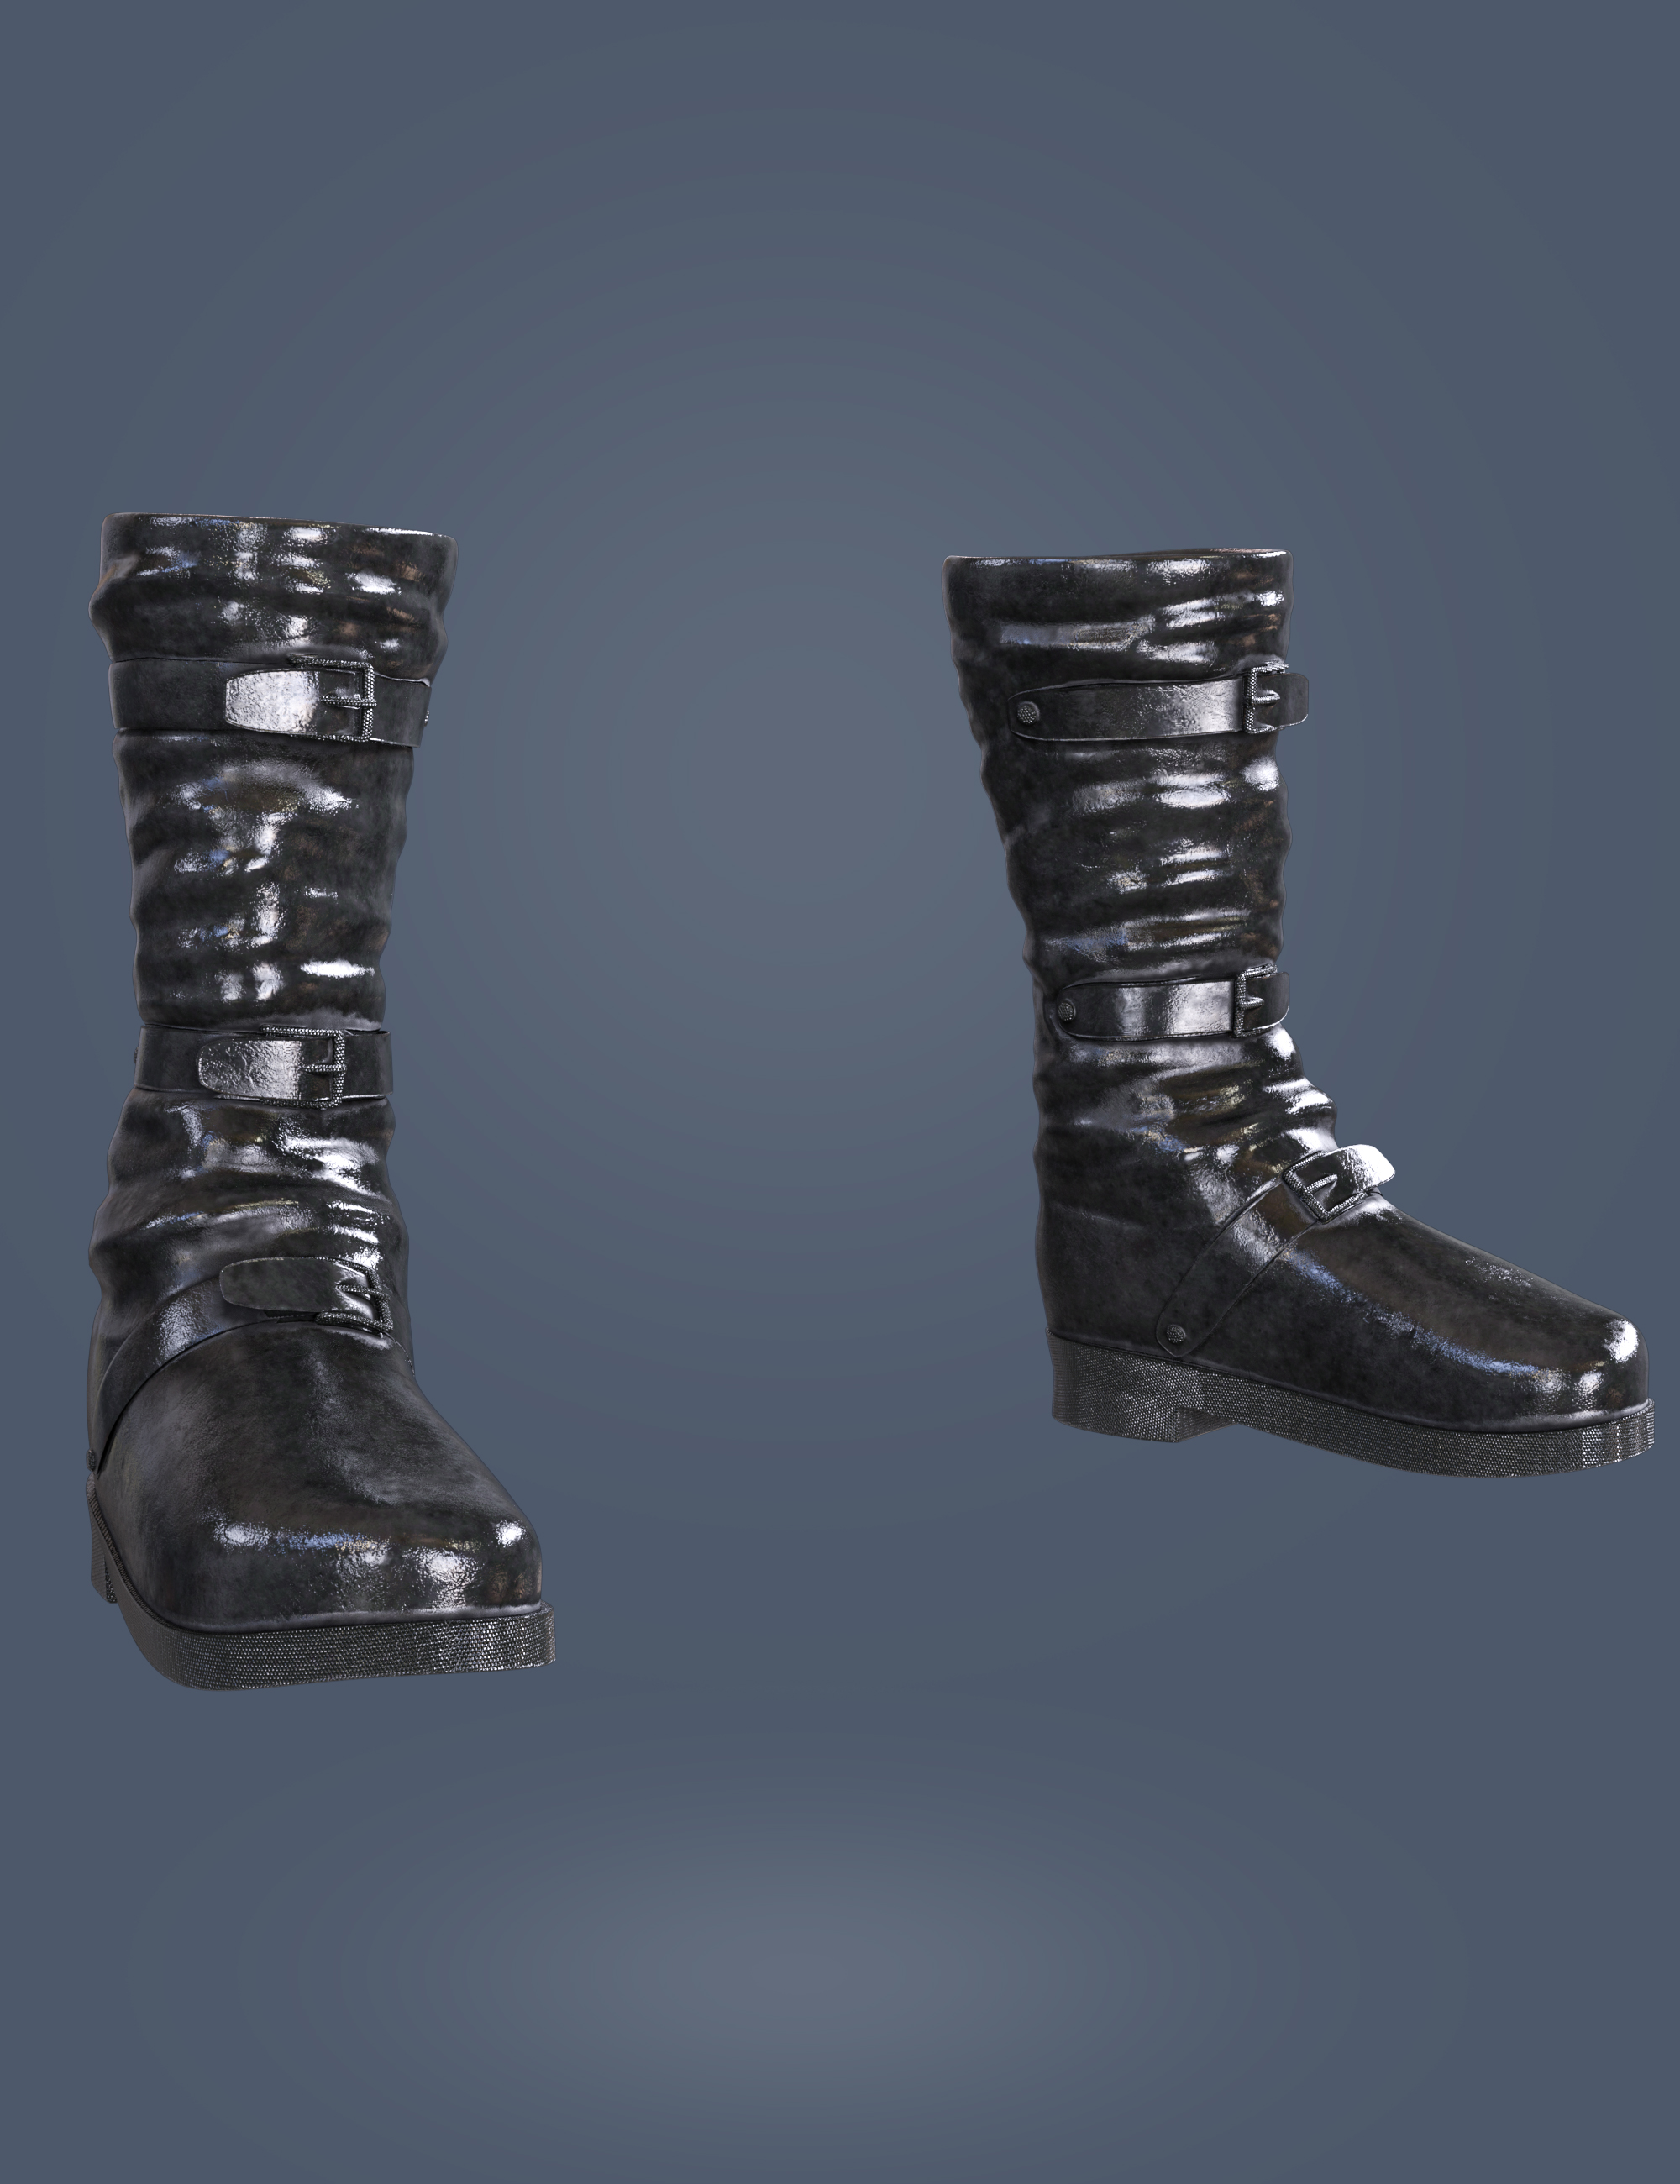 Halloween Plague Doctor Gloves and Shoes for Genesis 8 and 8.1 Females ...